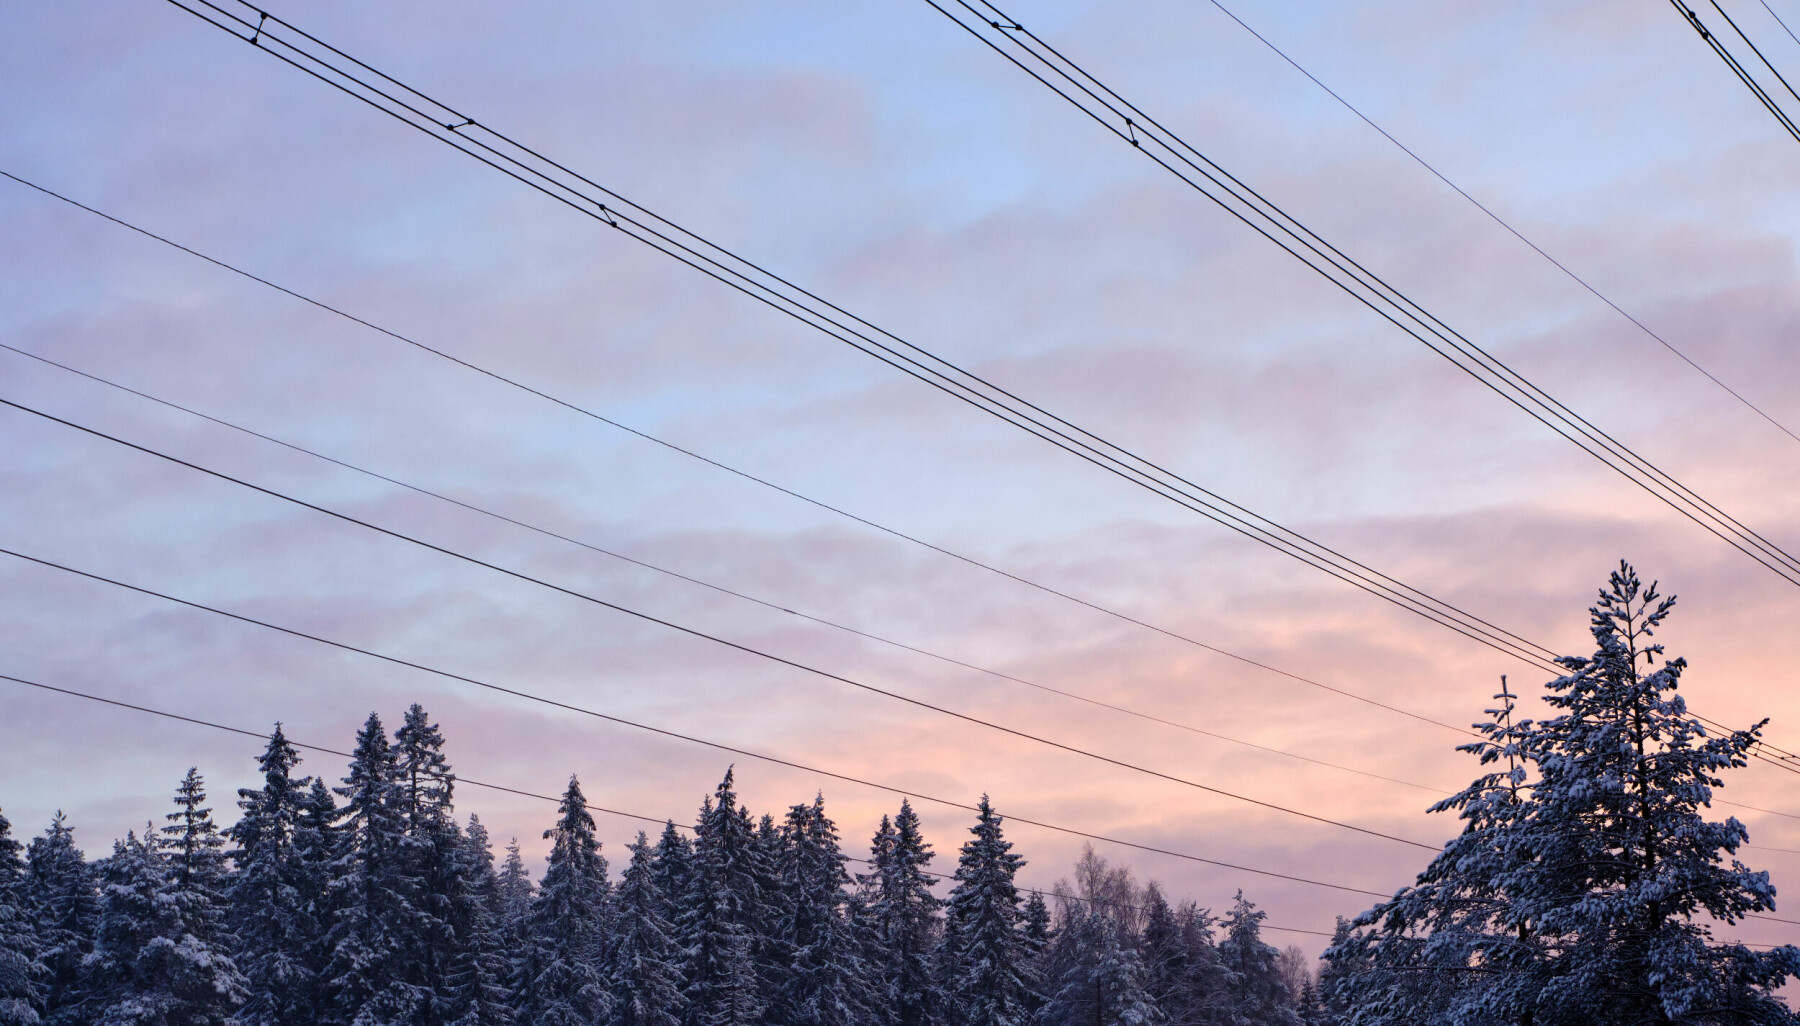 Winter,Landscape,Of,Pine,Woods,With,High,Voltage,Power,Lines